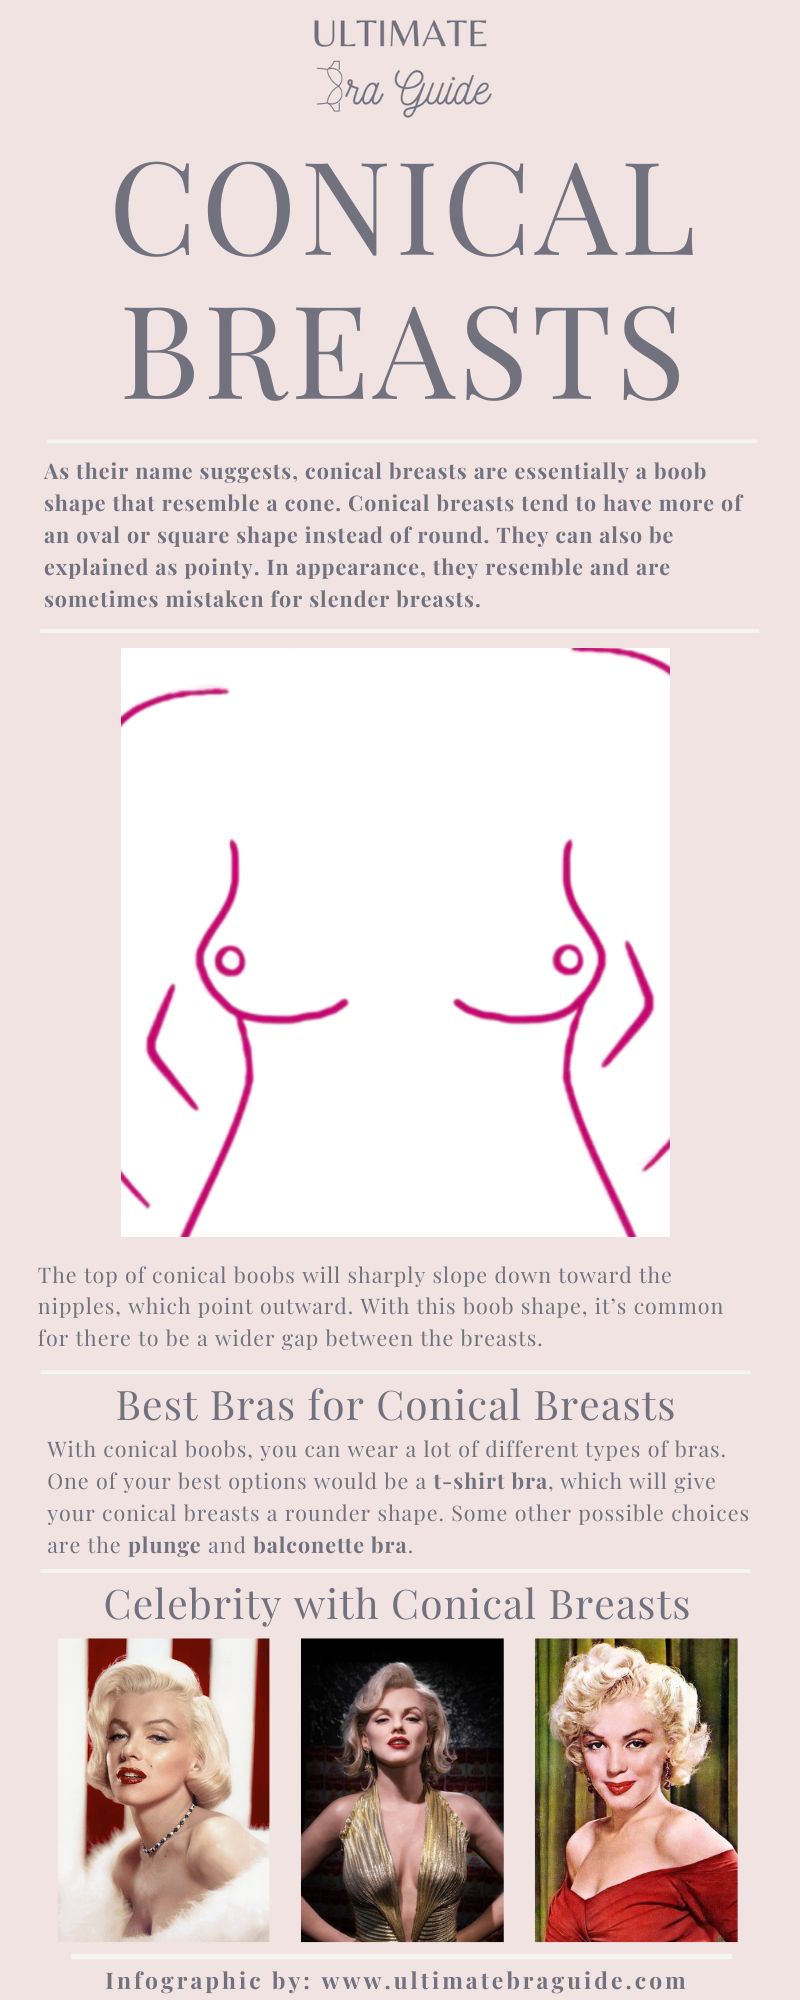 An infographic about conical breasts - what they are, what they look like, what are the best bras for them, and some celebrities with conical boobs